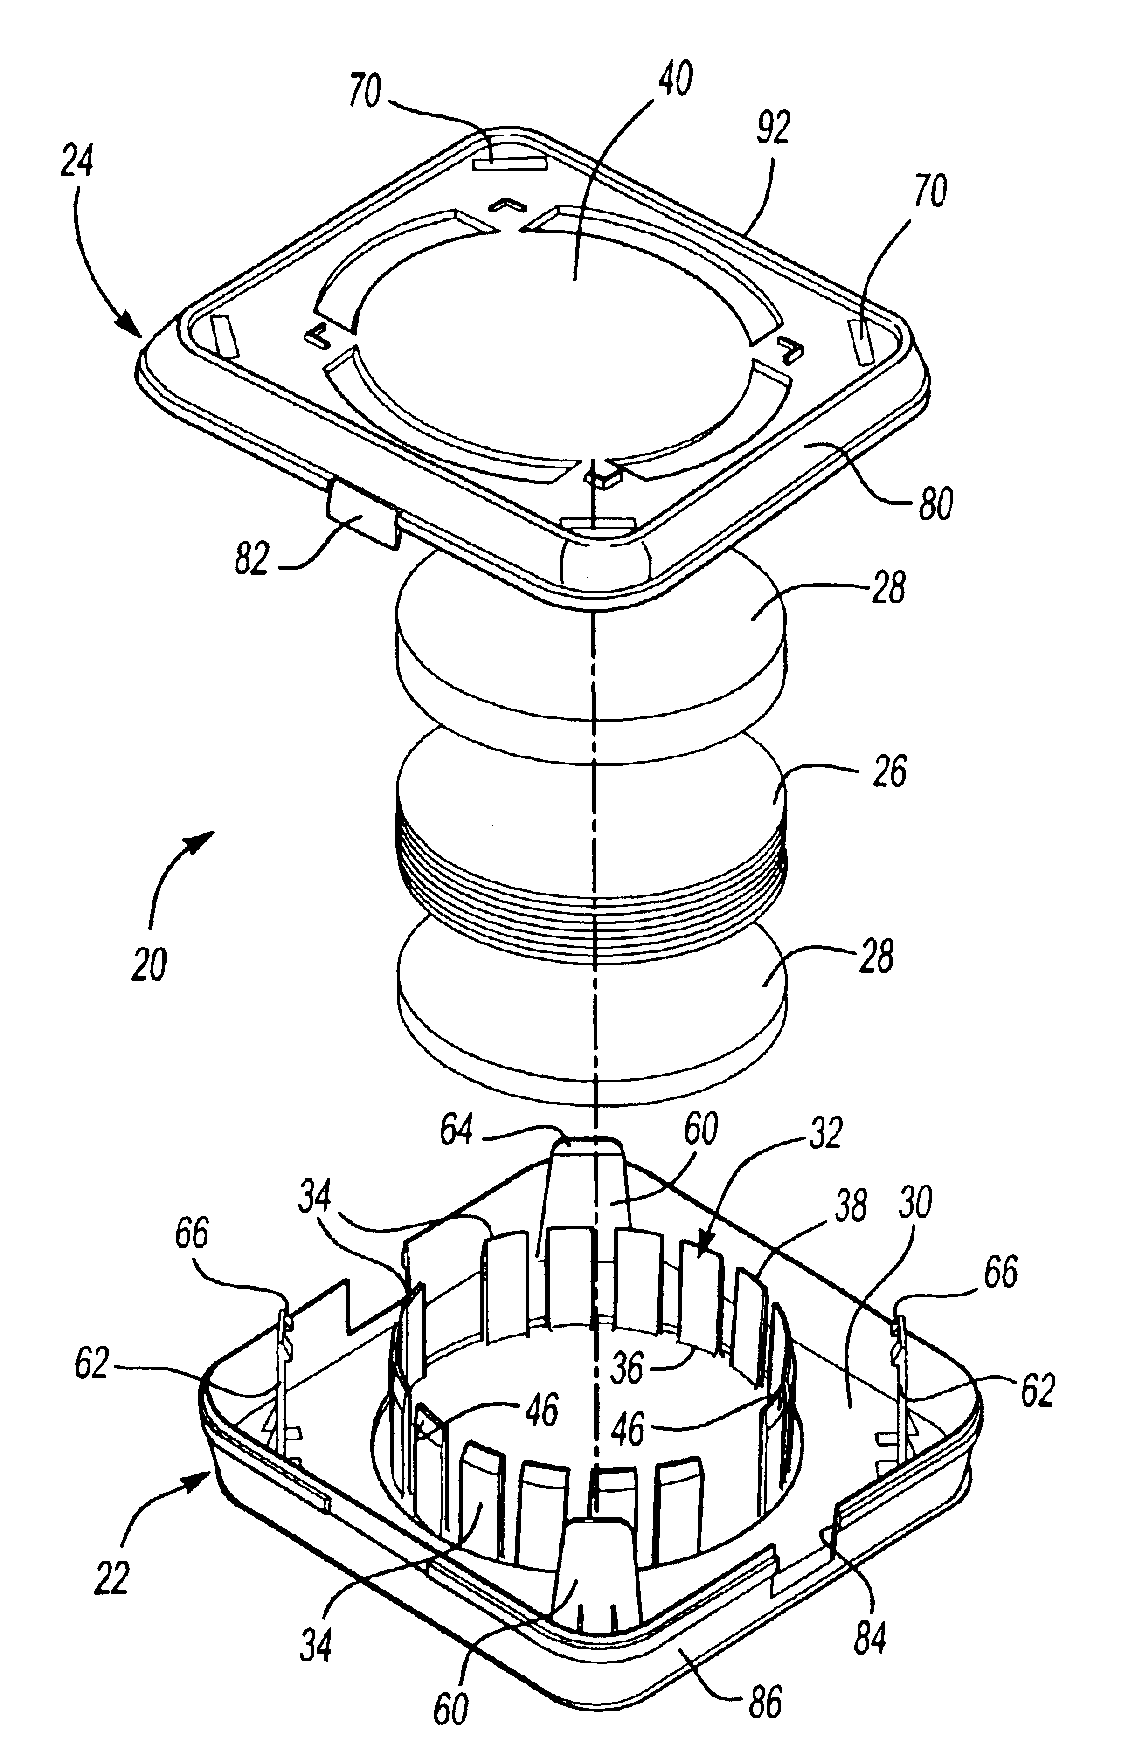 Container with an adjustable inside dimension that restricts movement of items within the container